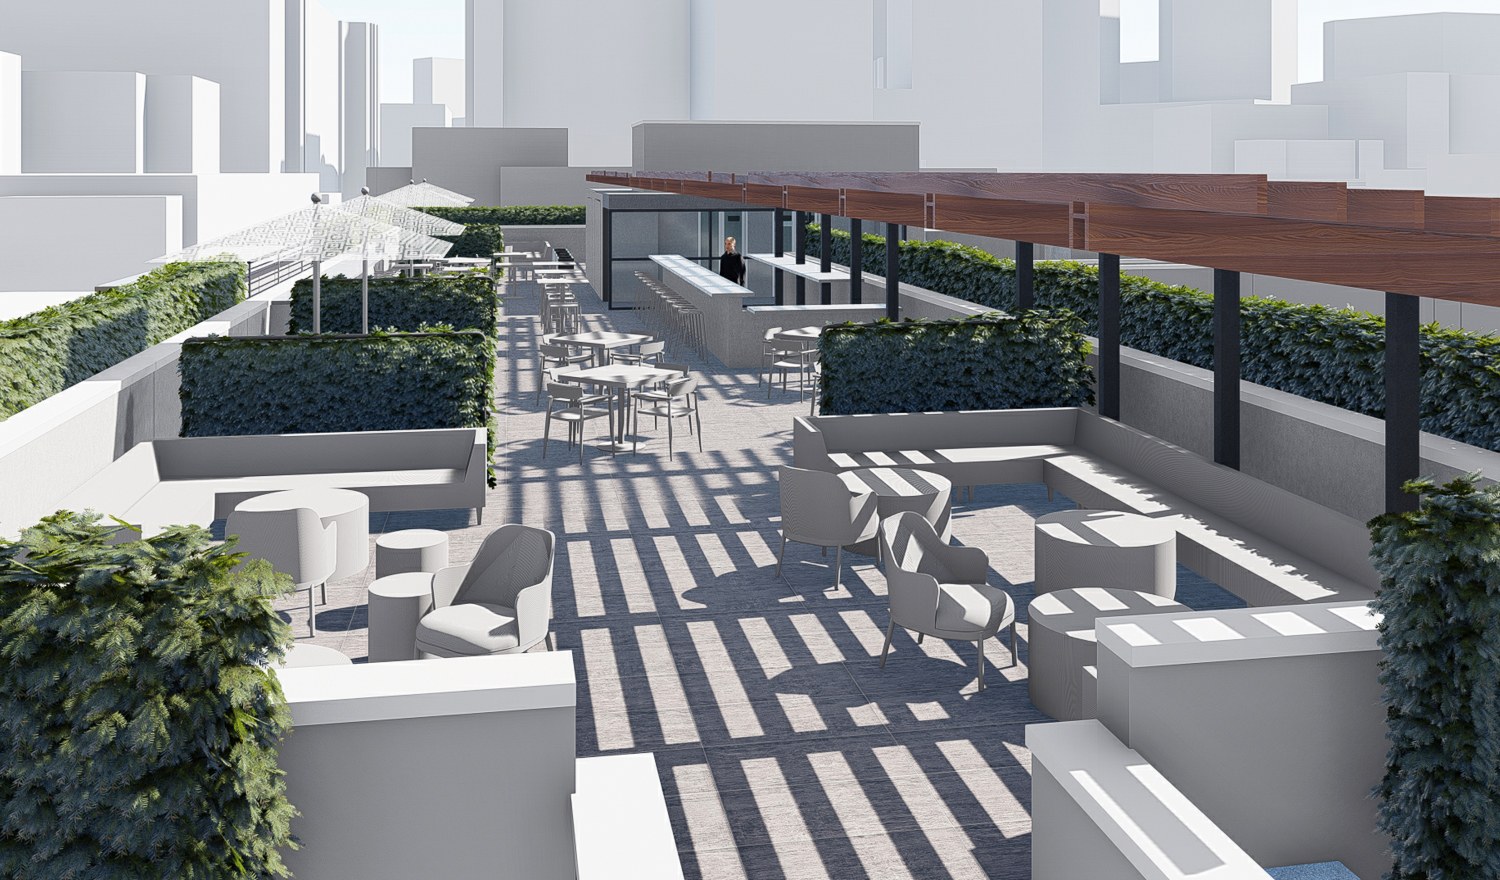 465 Grove Street amenity rooftop deck, rendering by Stanton Architecture